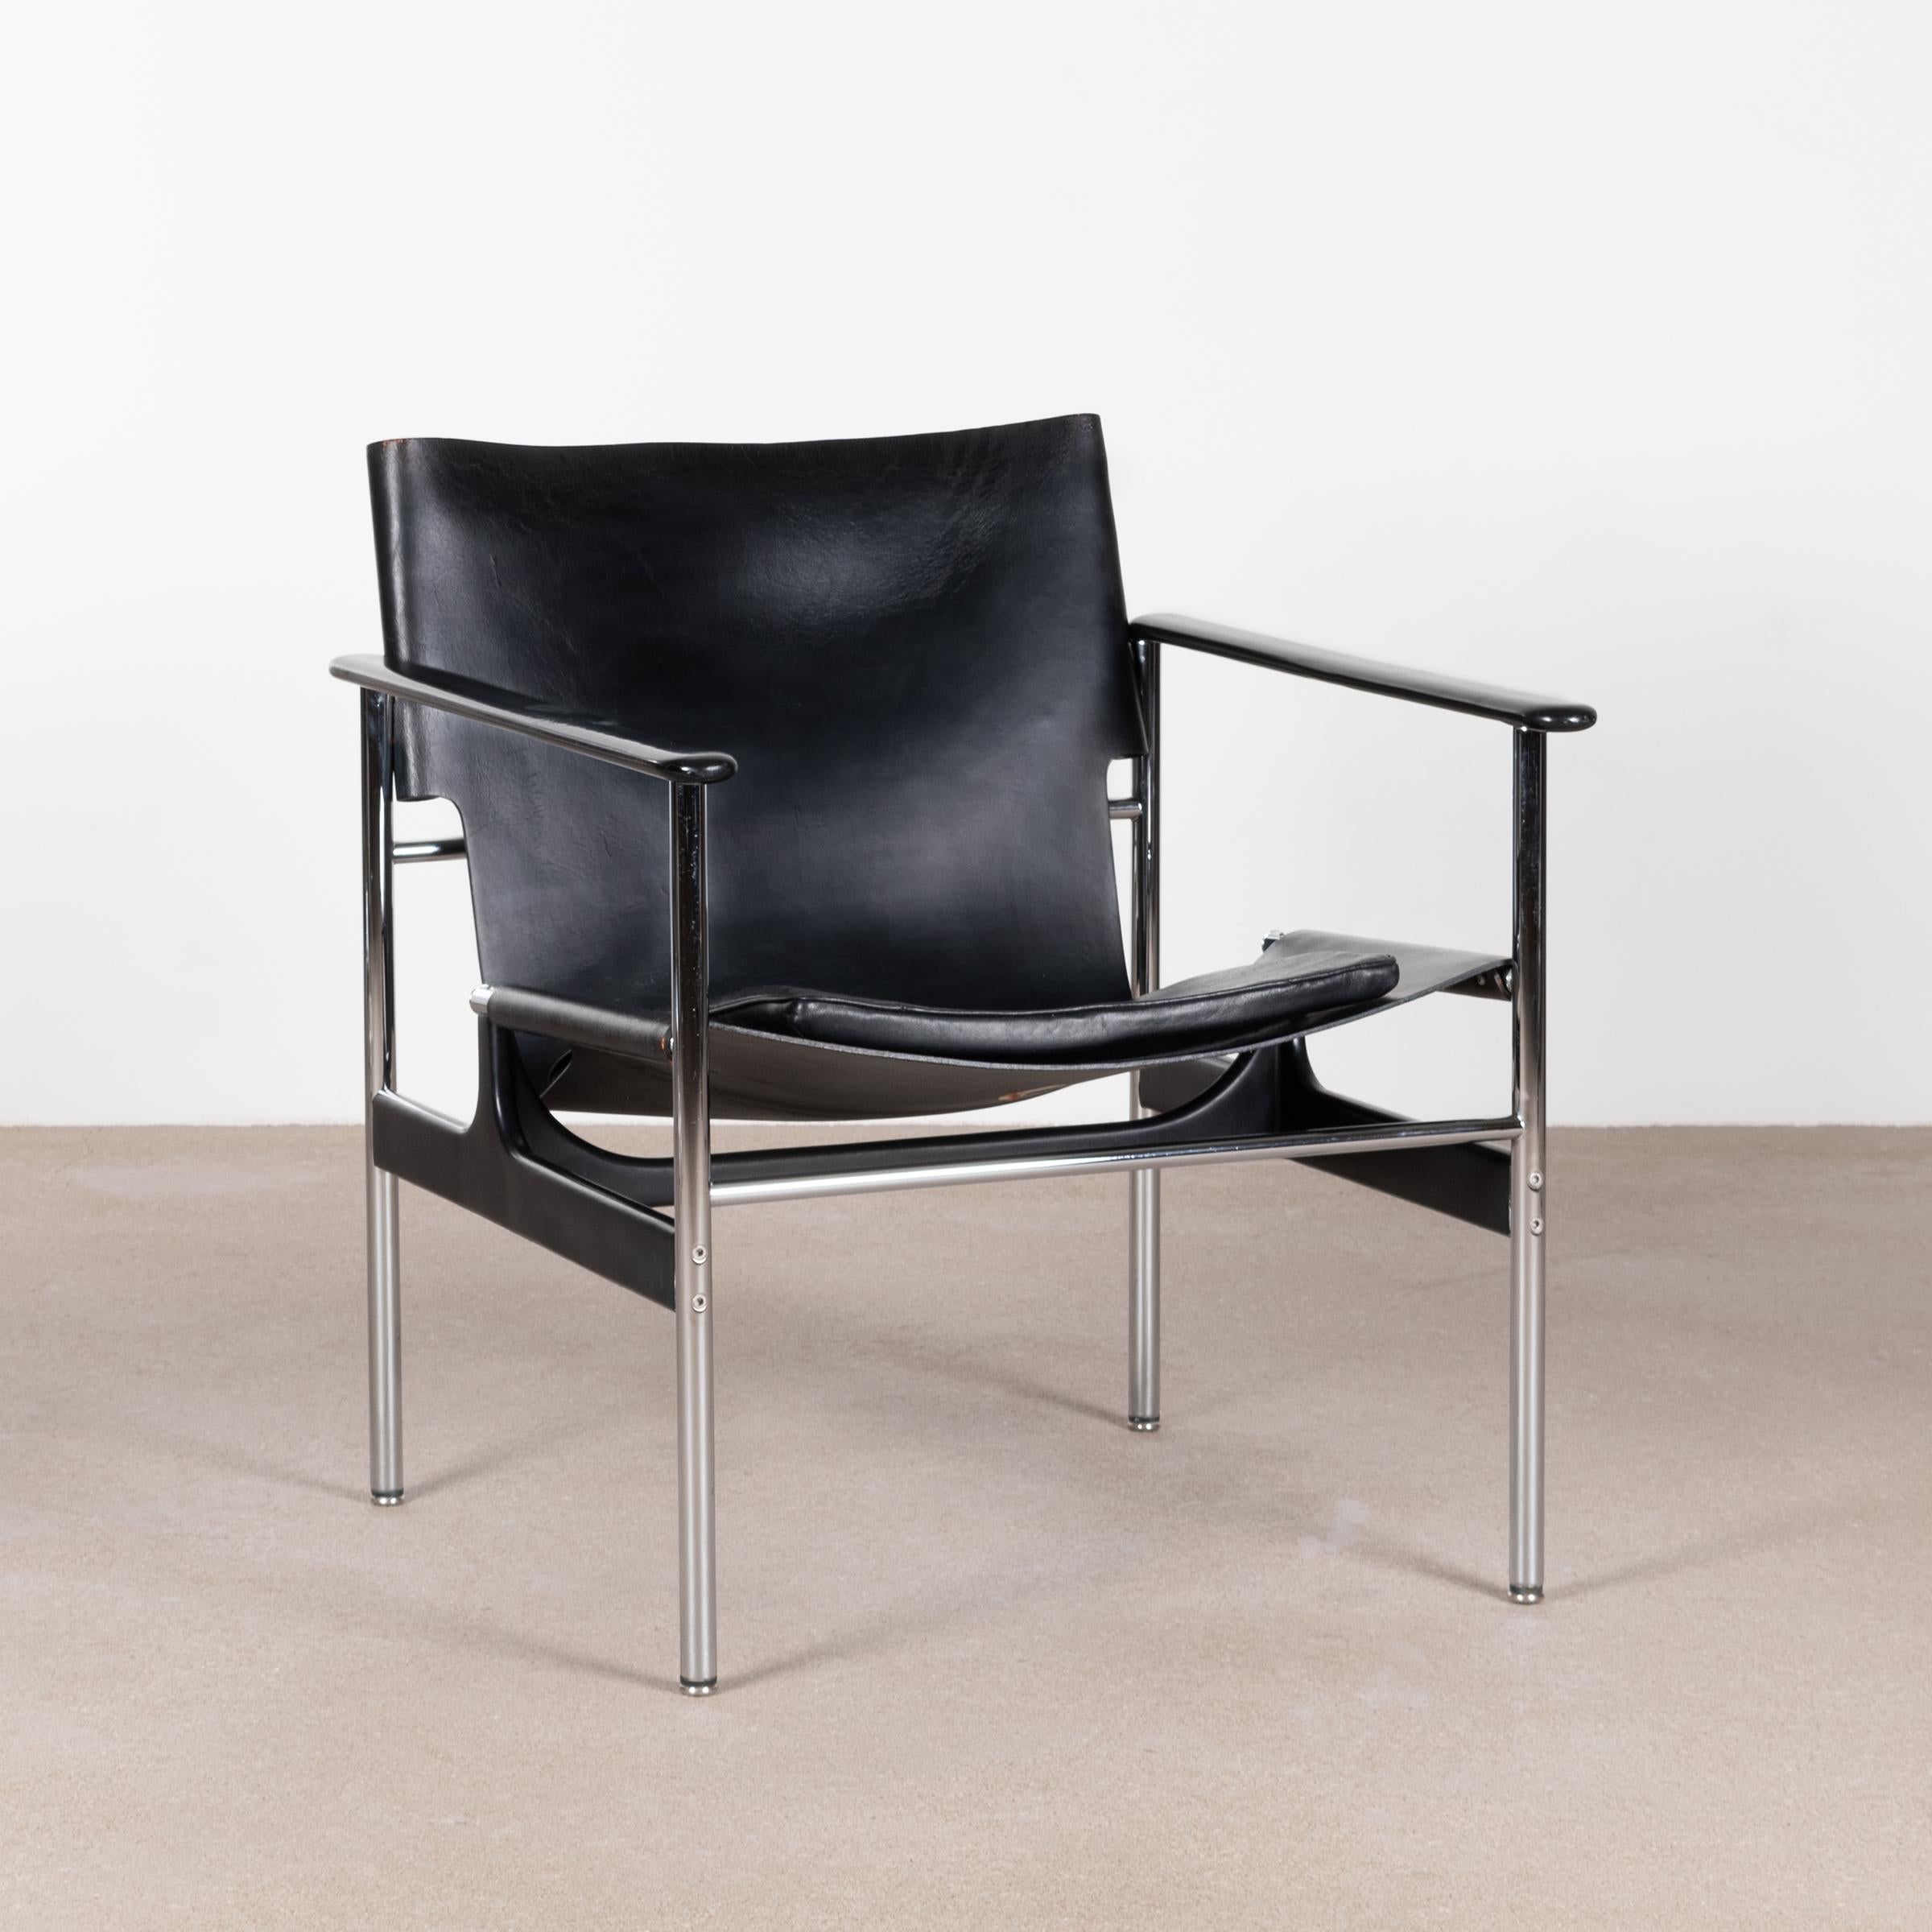 Comfortable easy armchair by Charles Pollock for Knoll. Tubular chrome steel frame, black saddle leather, separate black leather cushion and aluminum arm rests. Chair is signed with manufacture label on both saddle leather as cushion. All in very